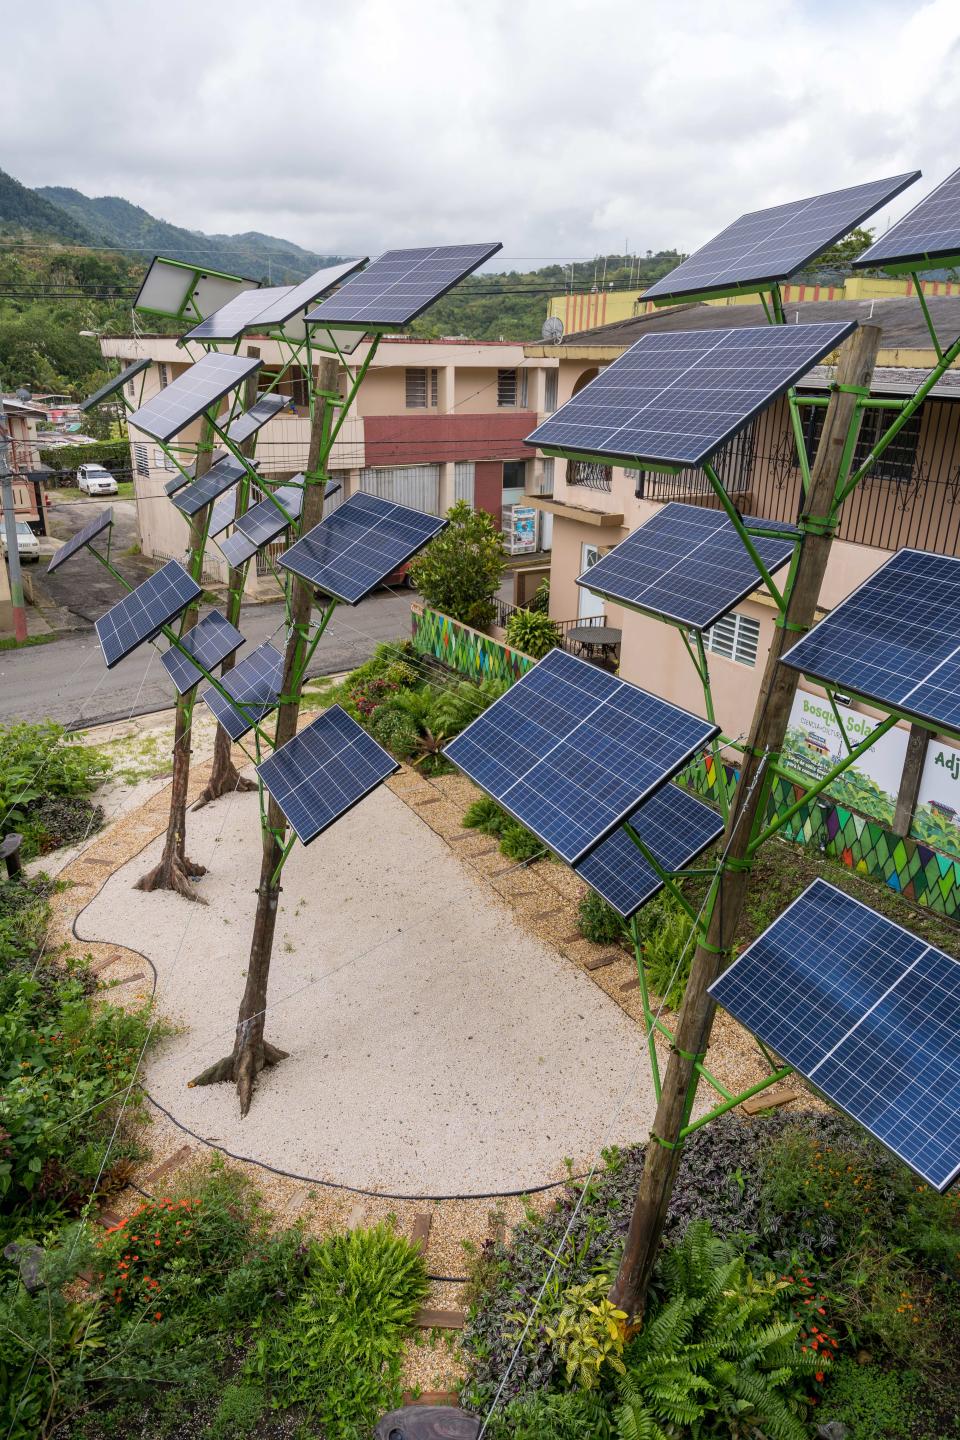 Casa Pueblo in Adjuntas became completely energy independent in 2017. Its executive director Arturo Massol-Deyá says a lot of what is highlighted after hurricanes is energy failures, but there are alternatives for Puerto Rico.